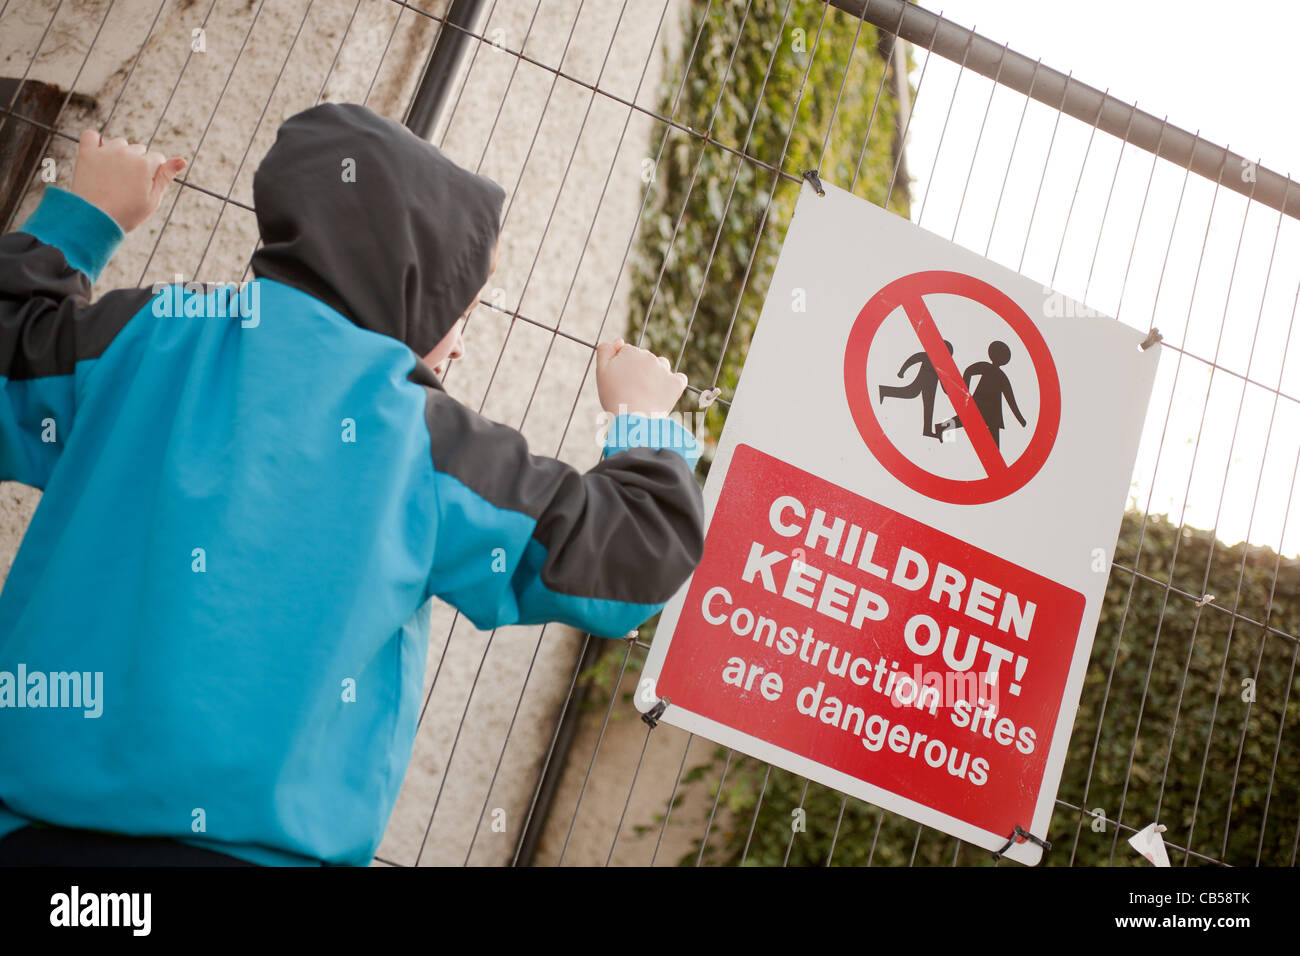 A young boy climbing a fence with warning signs Stock Photo